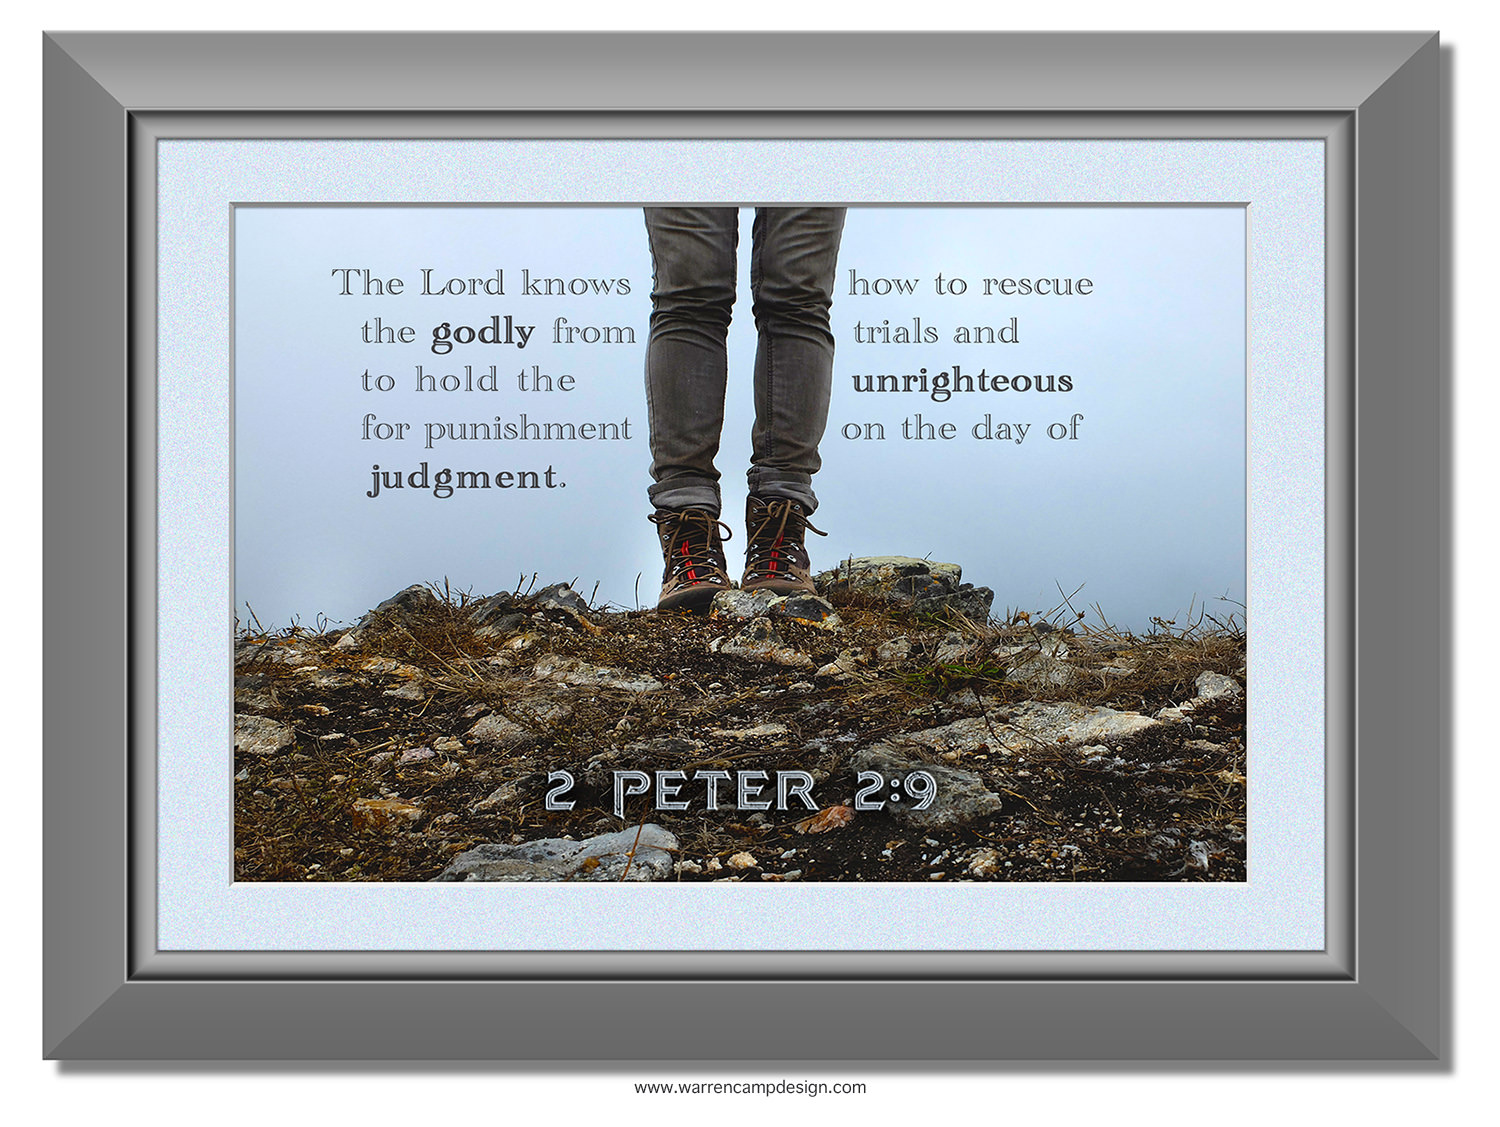 Scripture picture of 2nd Peter 2:9, emphasizing how the Lord rescues the godly and judges the unrighteous.